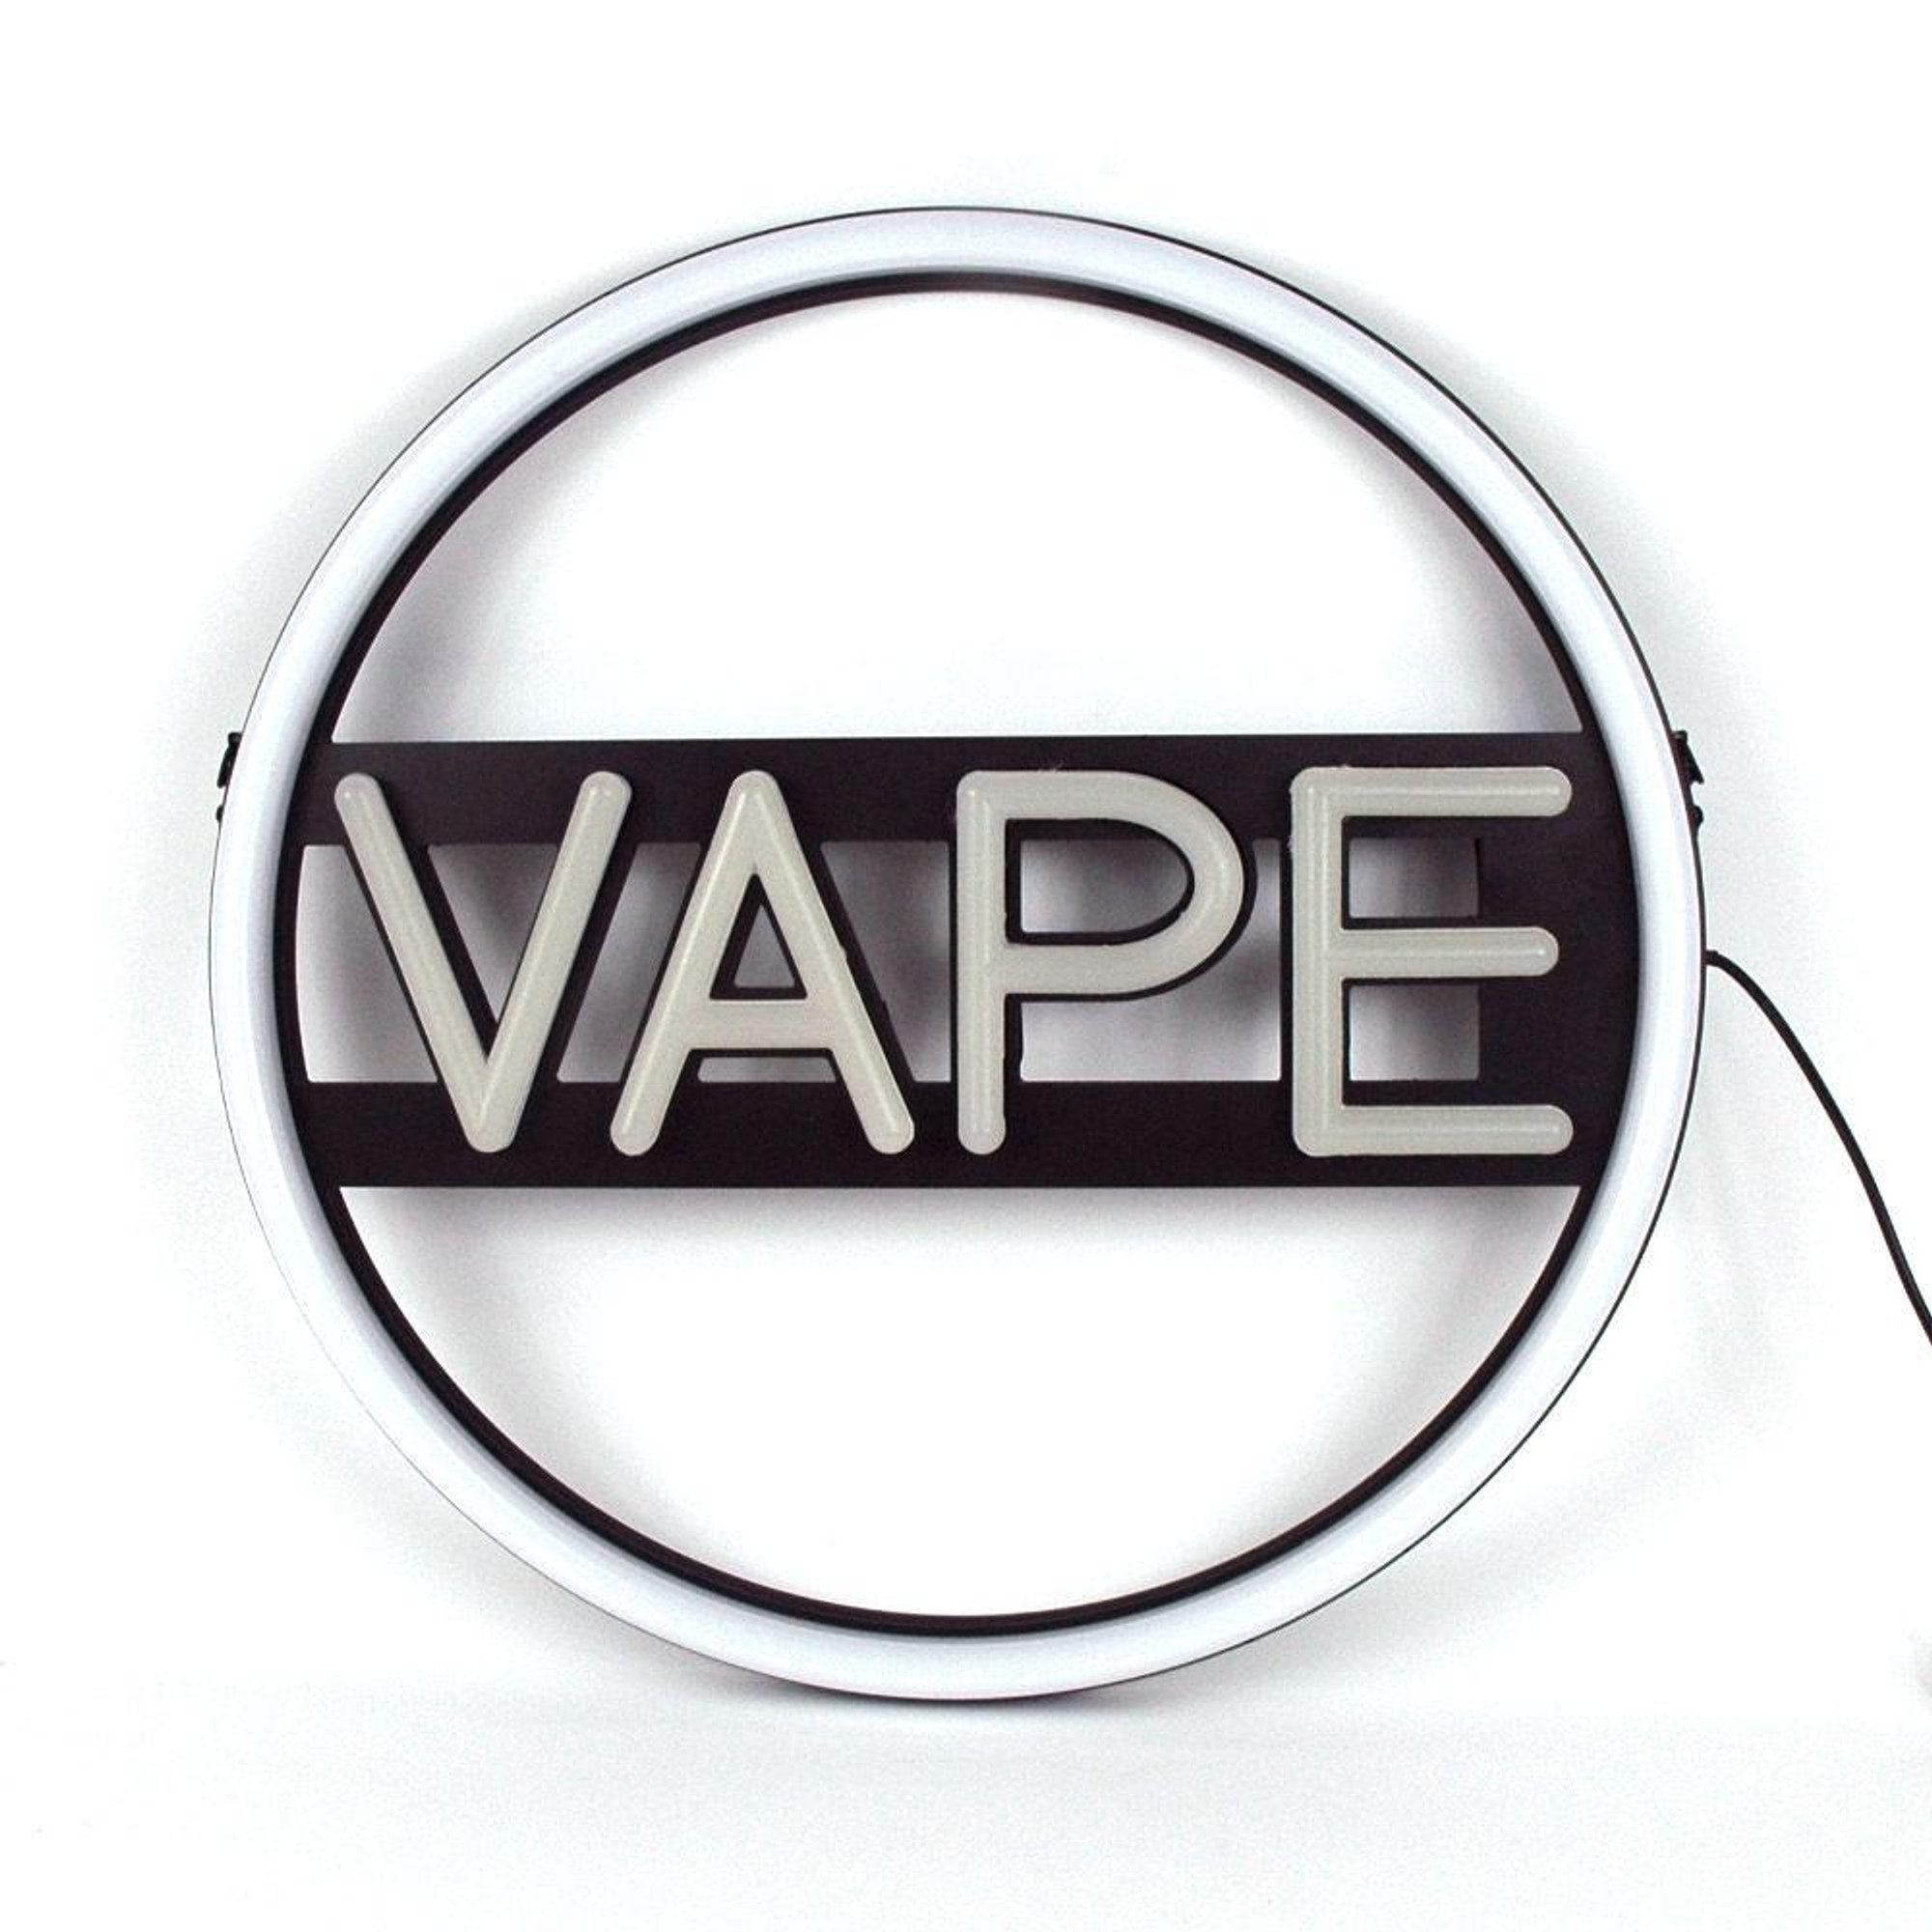 ROUND NEON SIGN WITH REMOTE (VAPE)